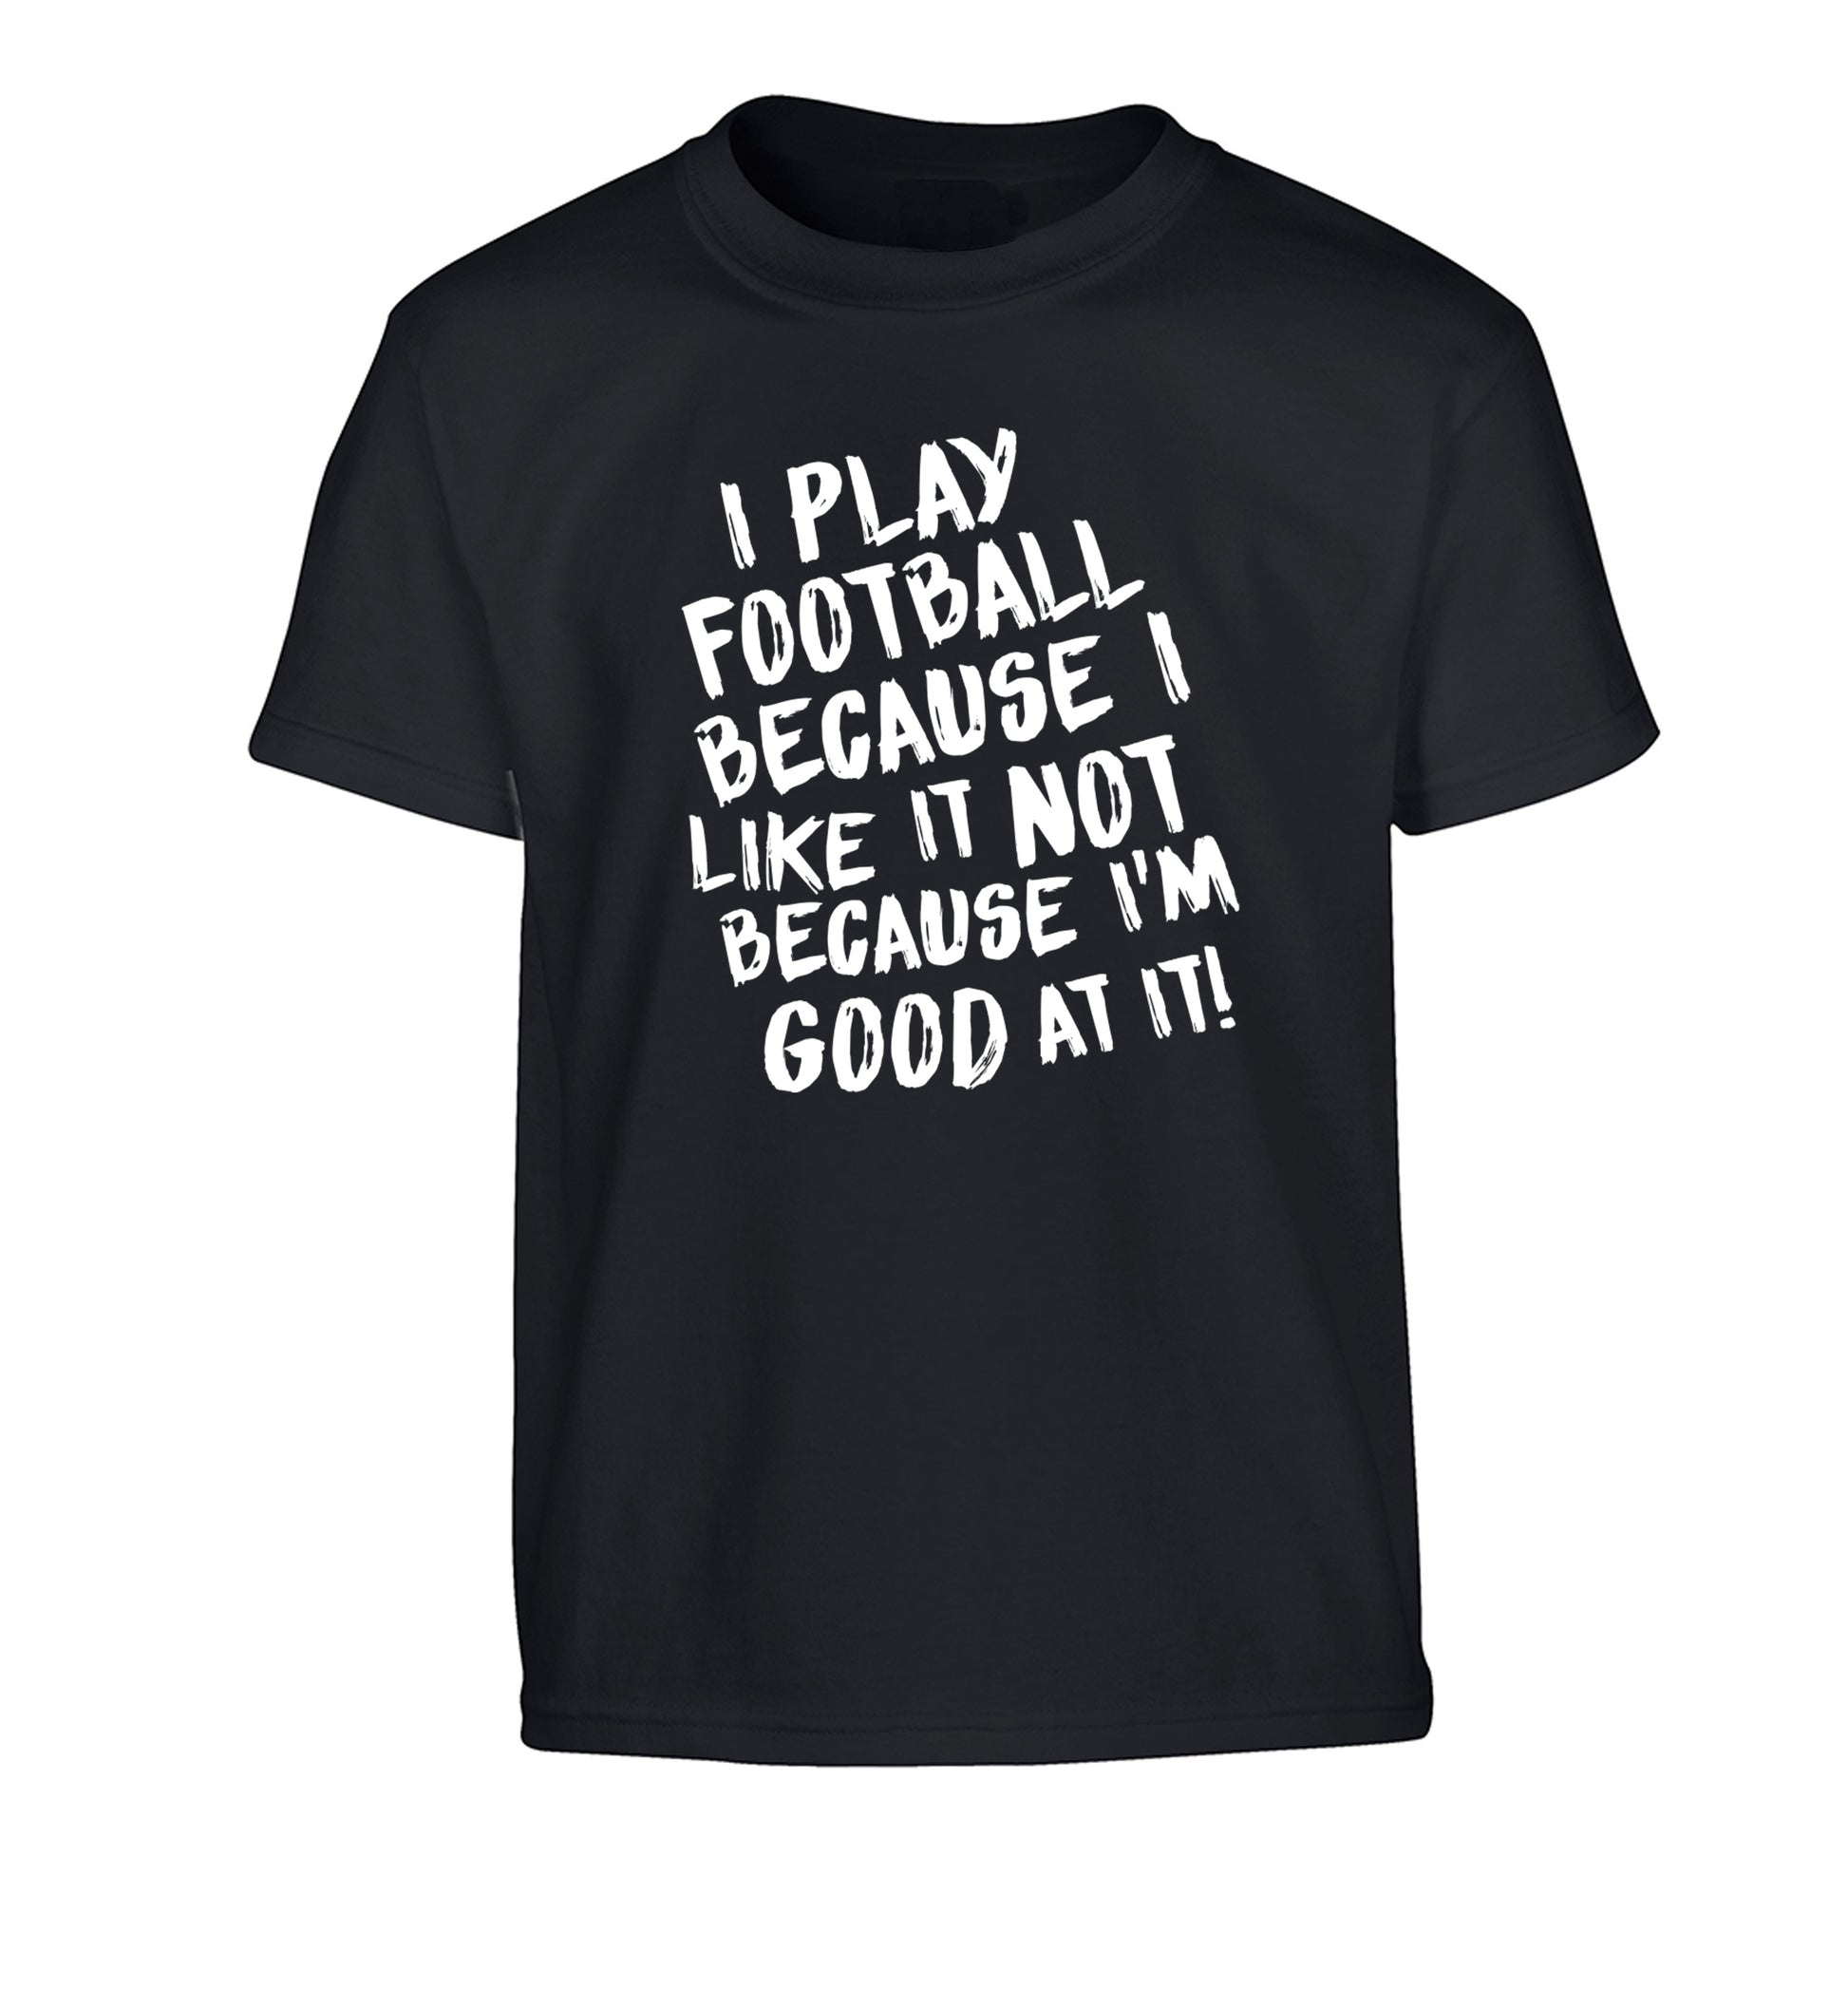 I play football because I like it not because I'm good at it Children's black Tshirt 12-14 Years